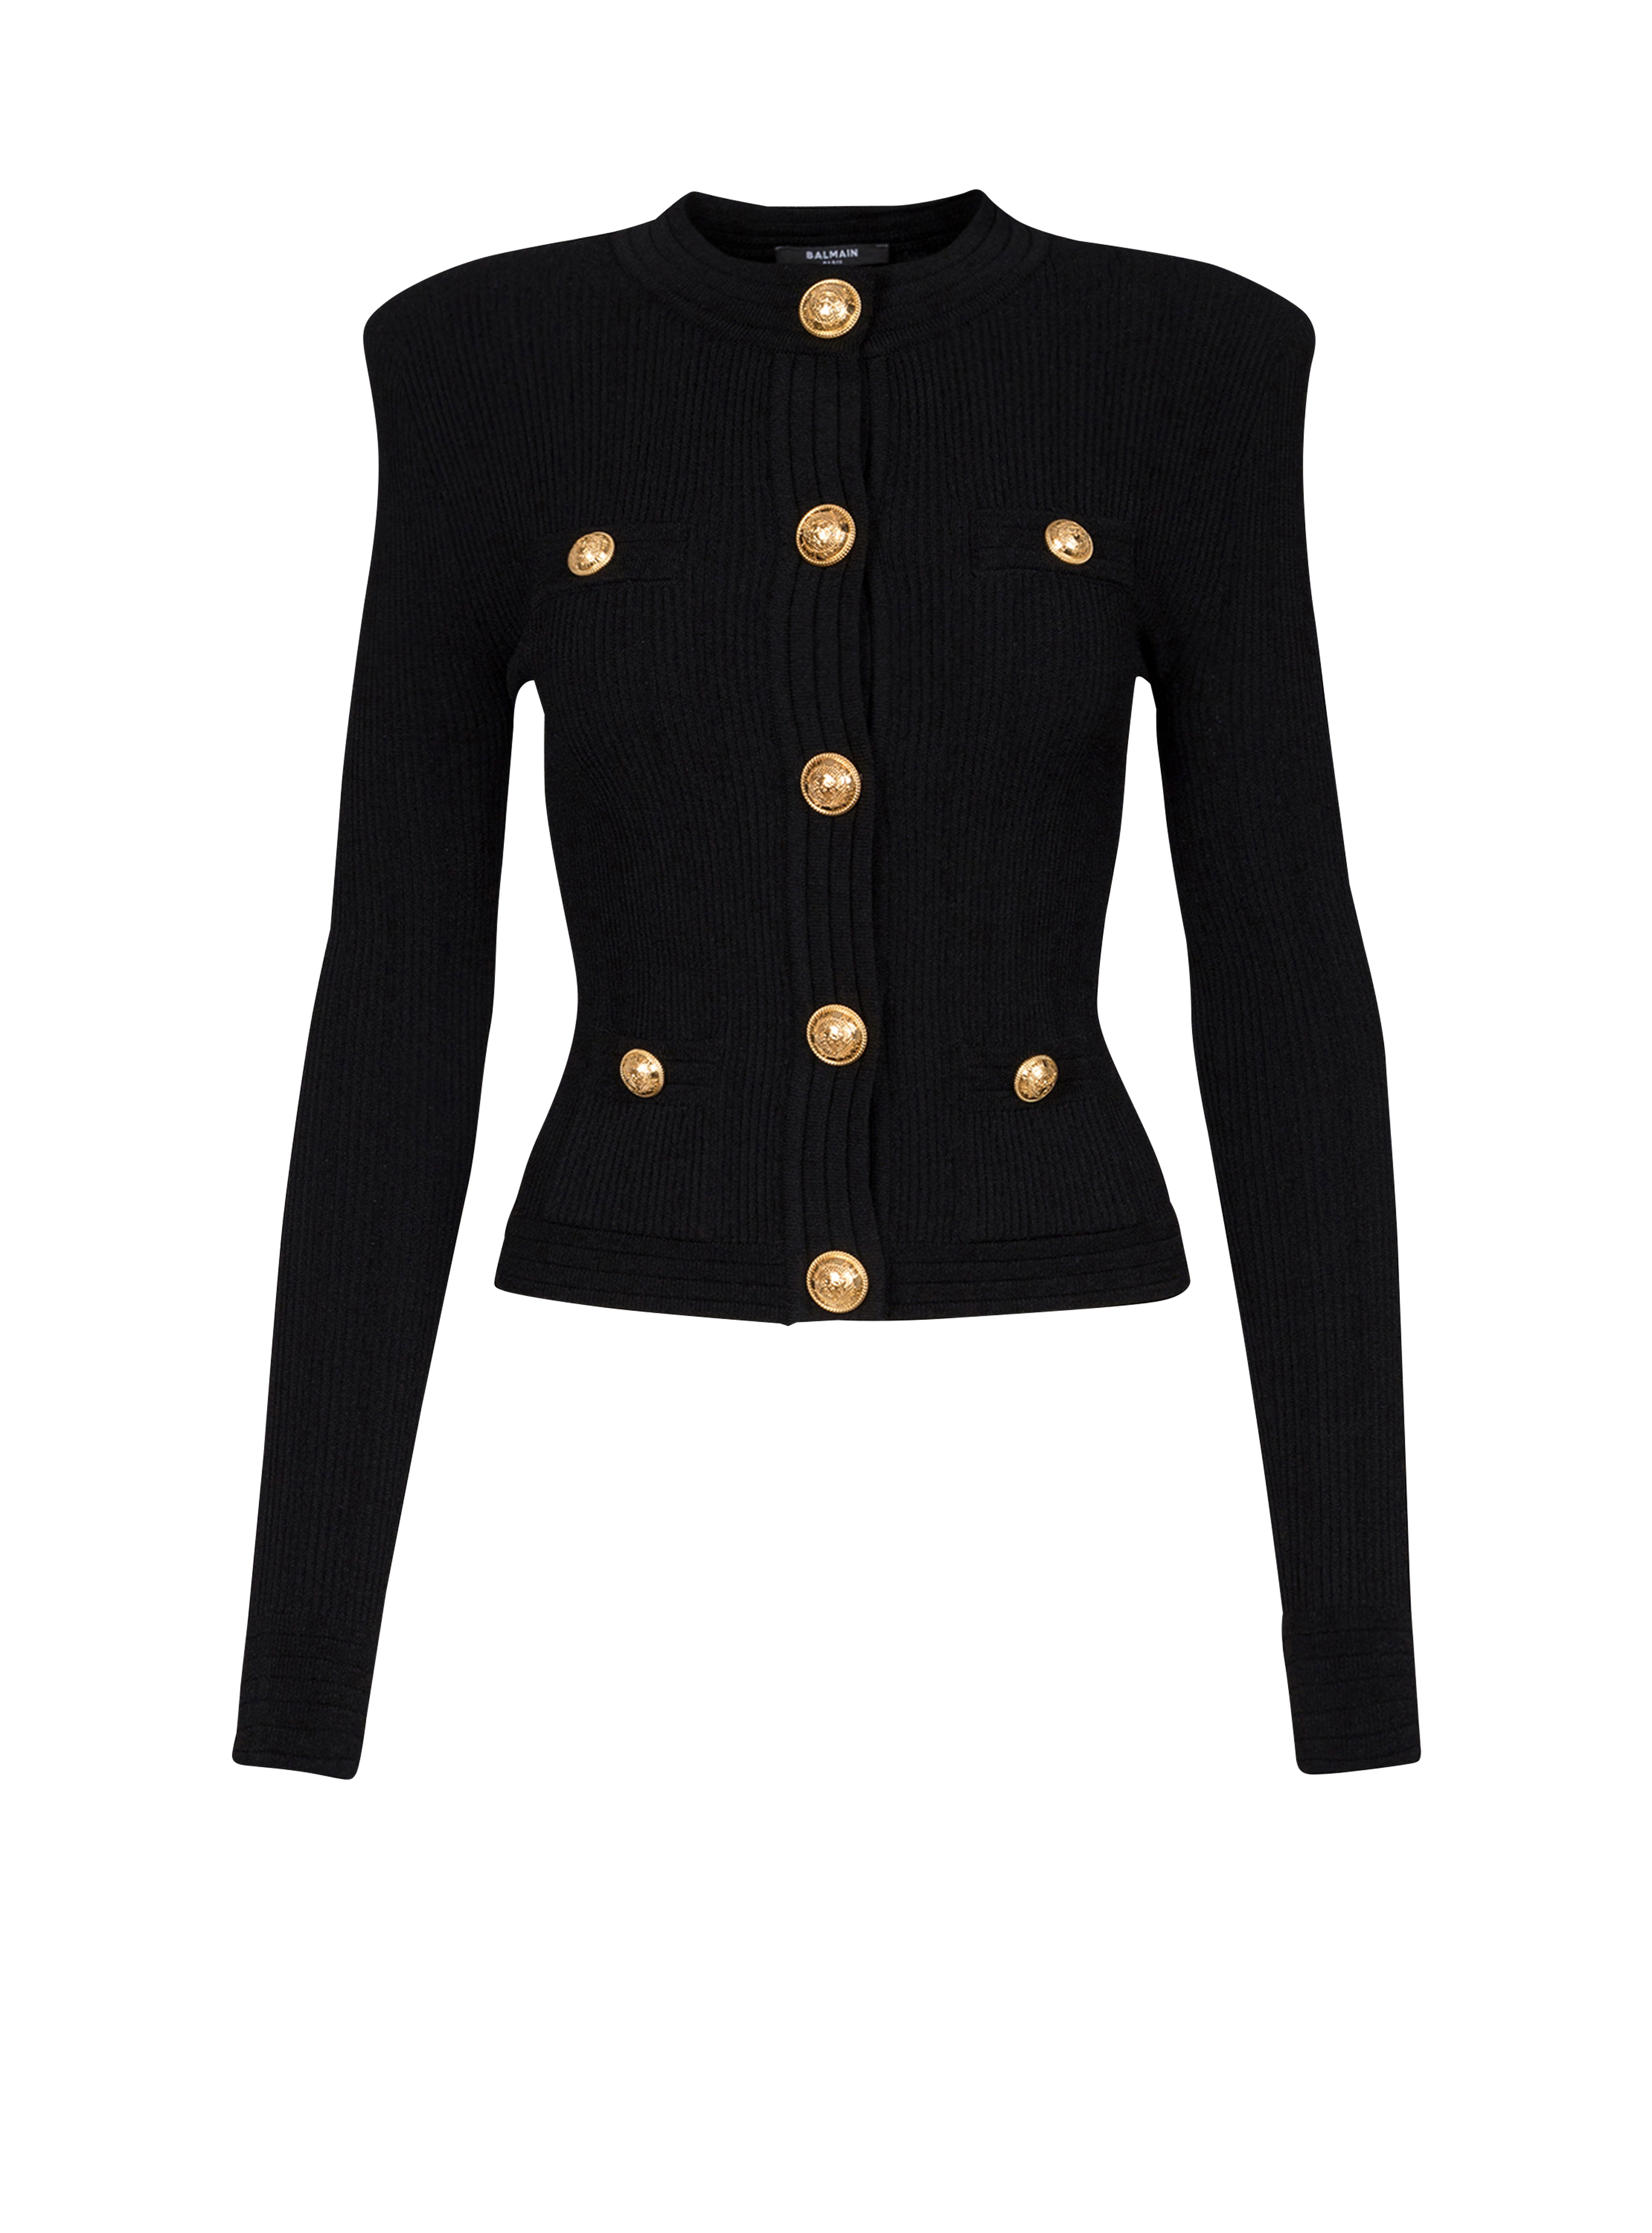 Cropped knit cardigan with gold-tone buttons, black